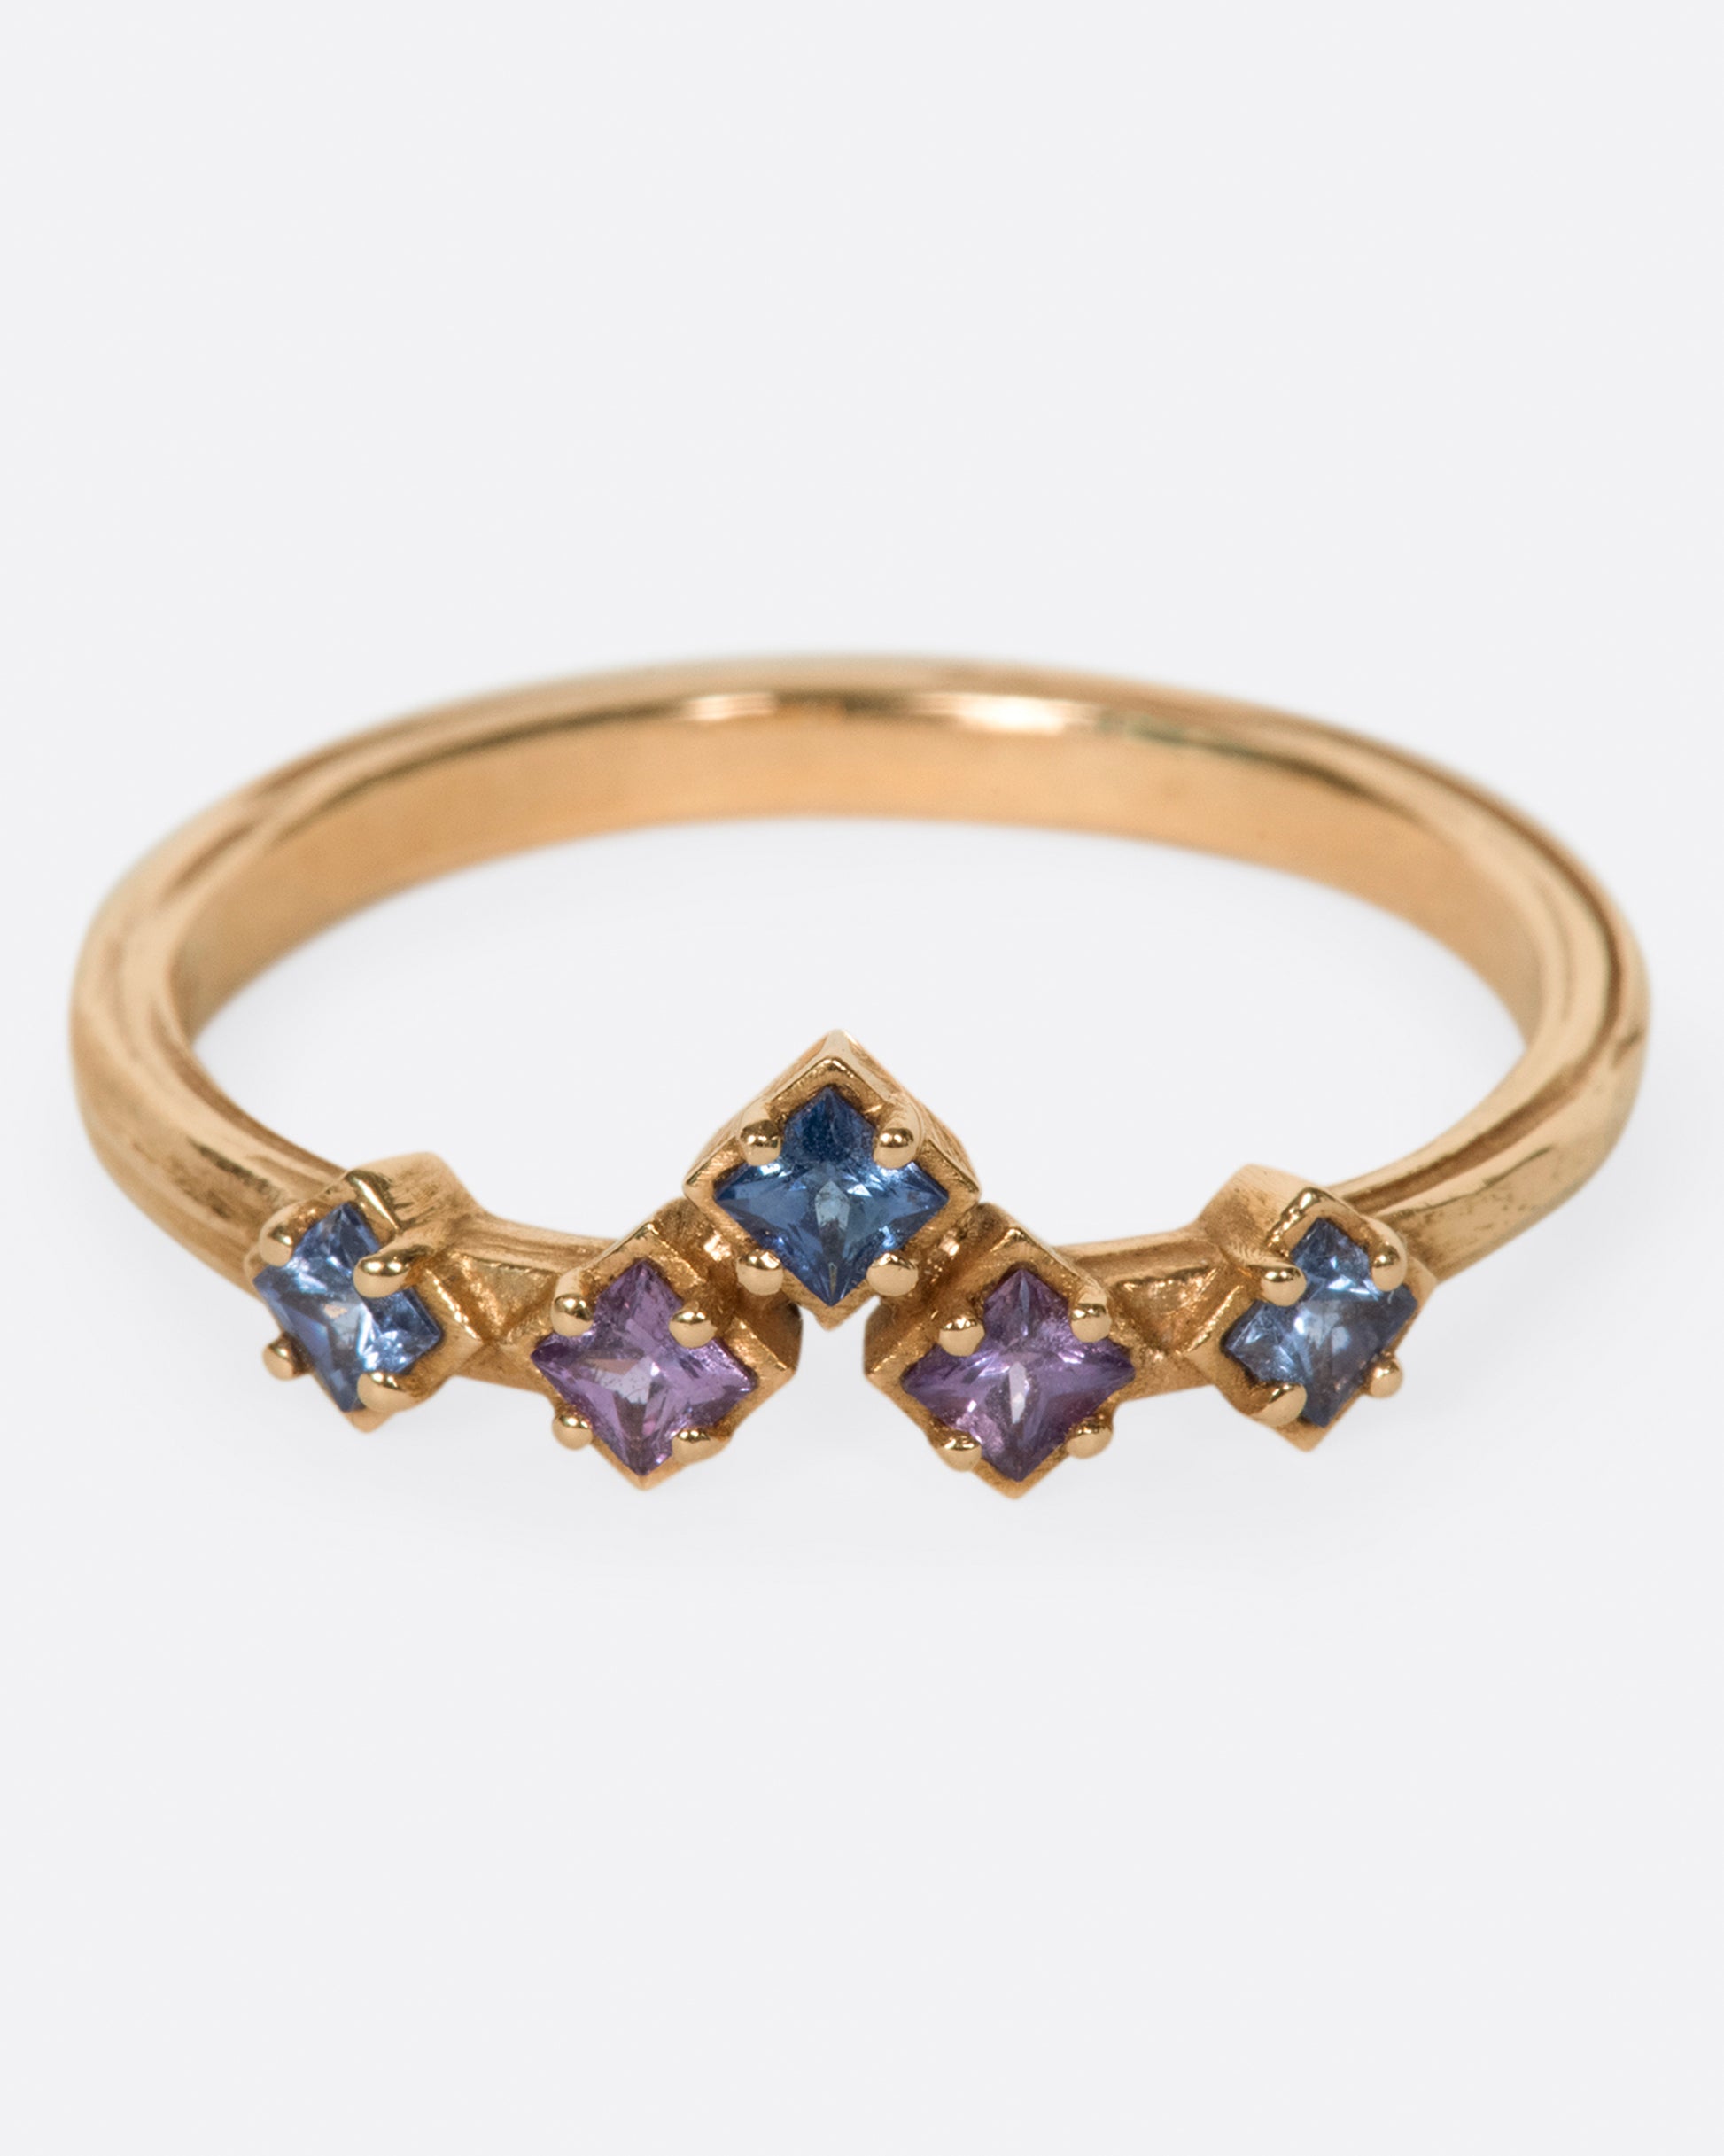 Inspired by the architecture of Tokyo, this curved band features princess cut blue and purple sapphires.